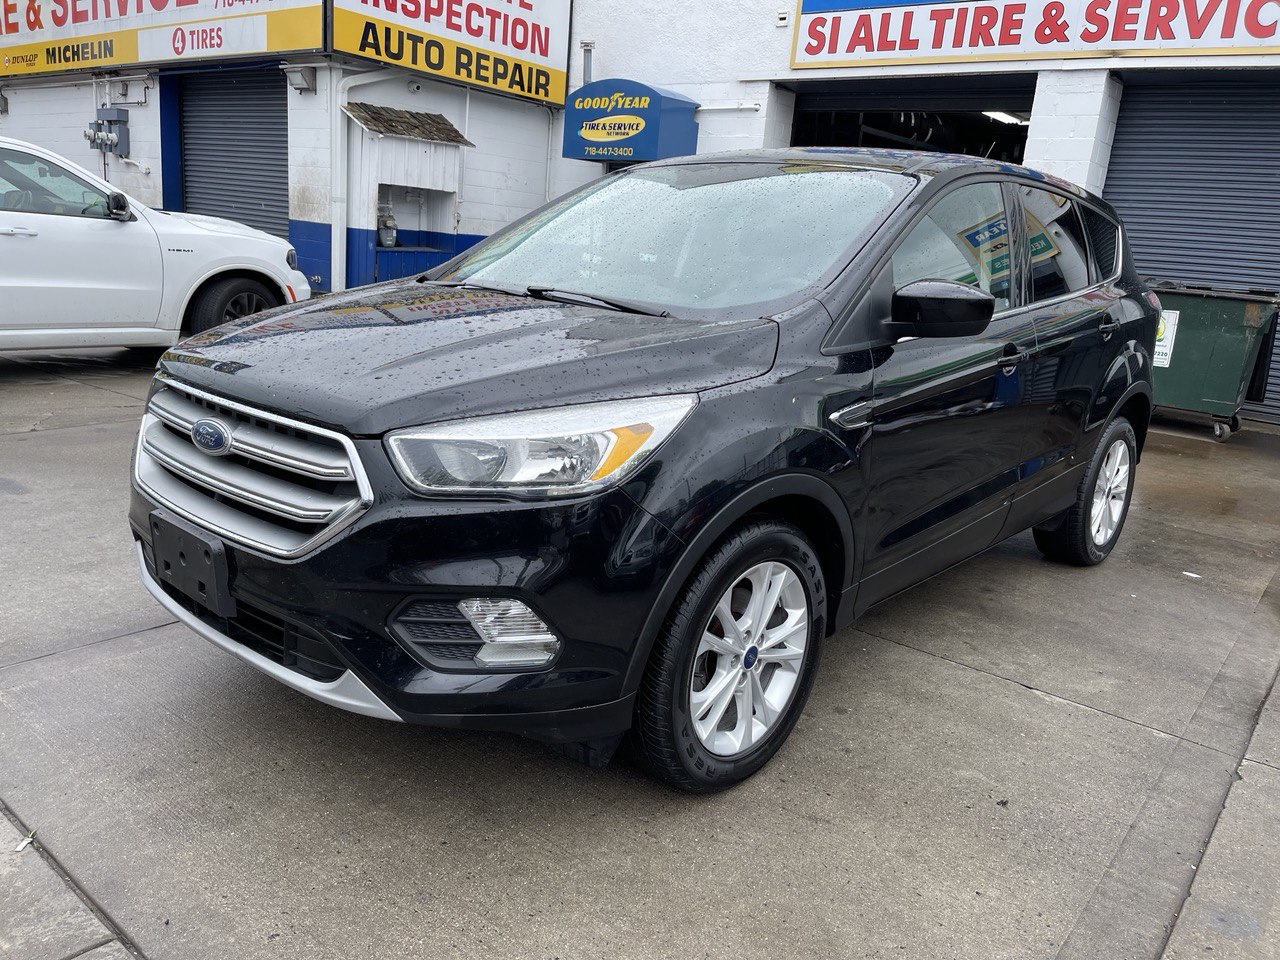 Used Car - 2017 Ford Escape SE for Sale in Staten Island, NY